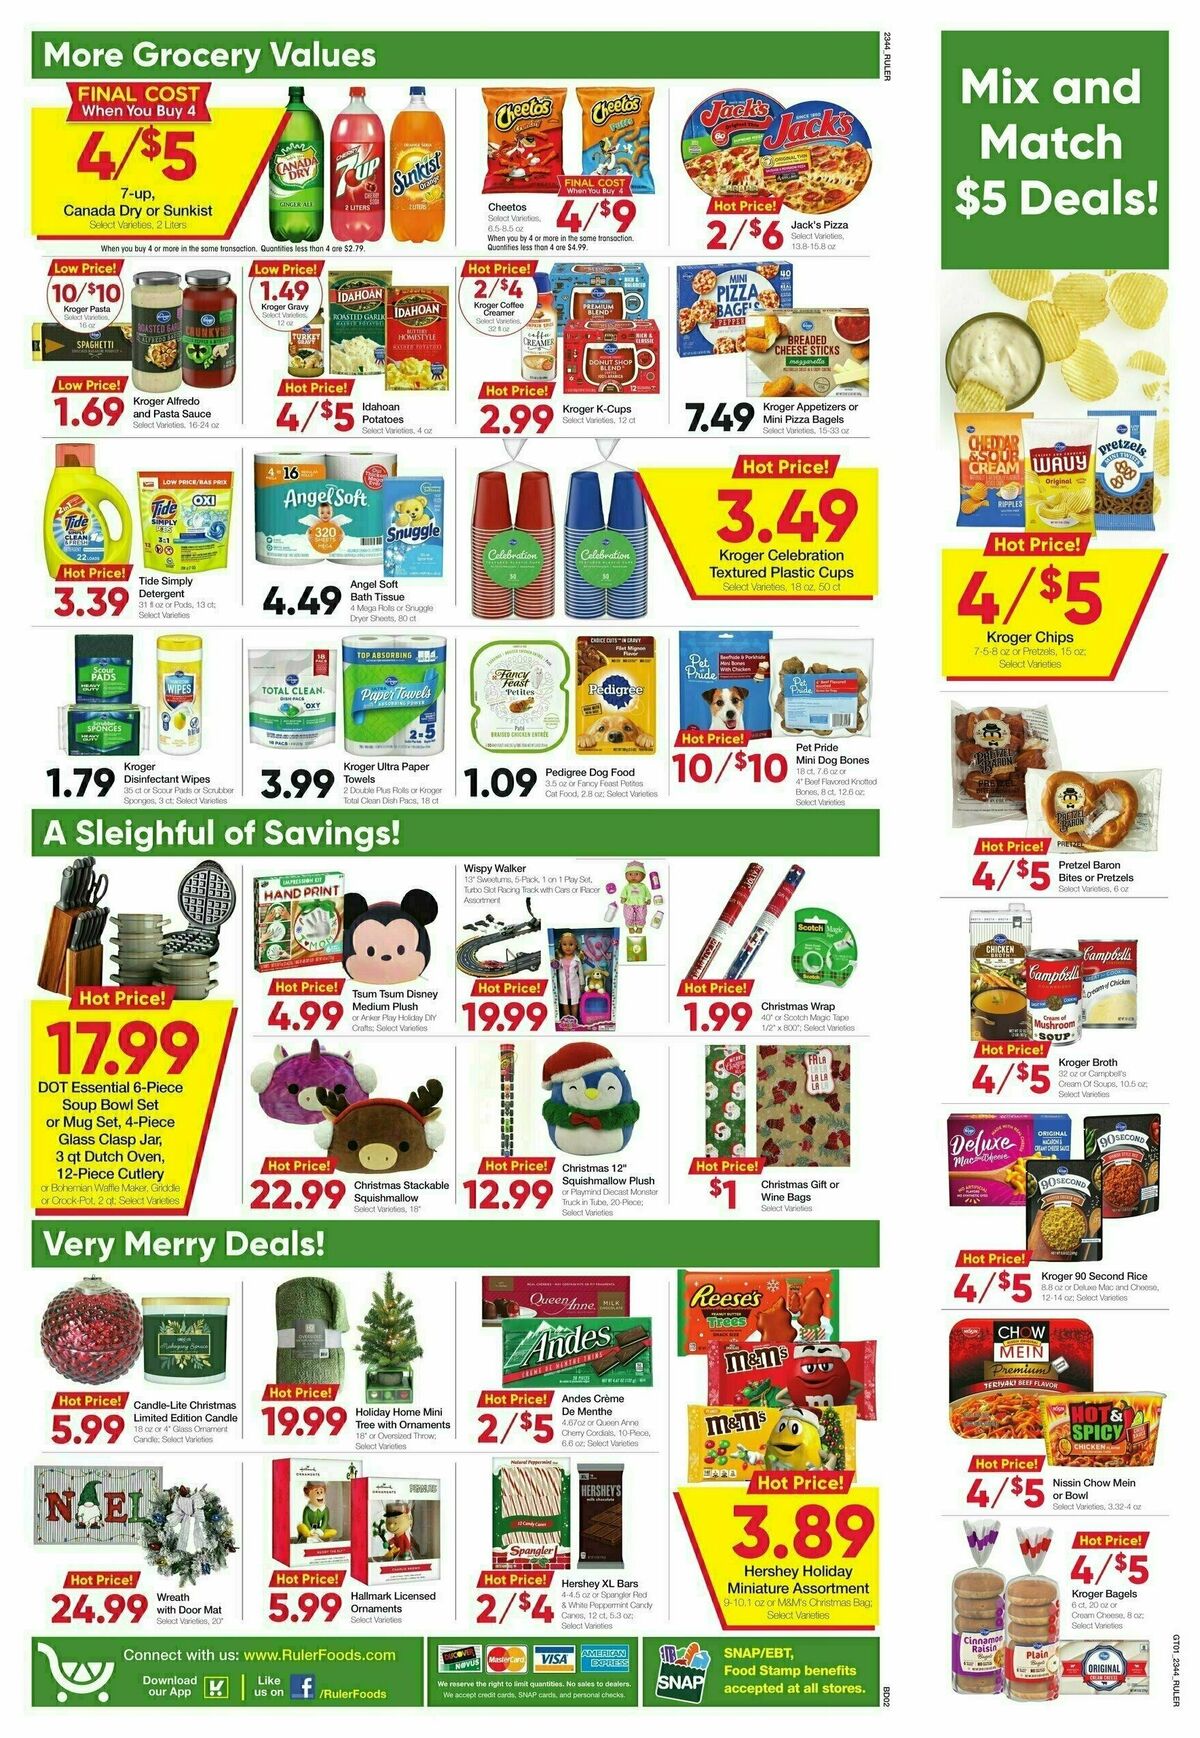 Ruler Foods Weekly Ad from November 29